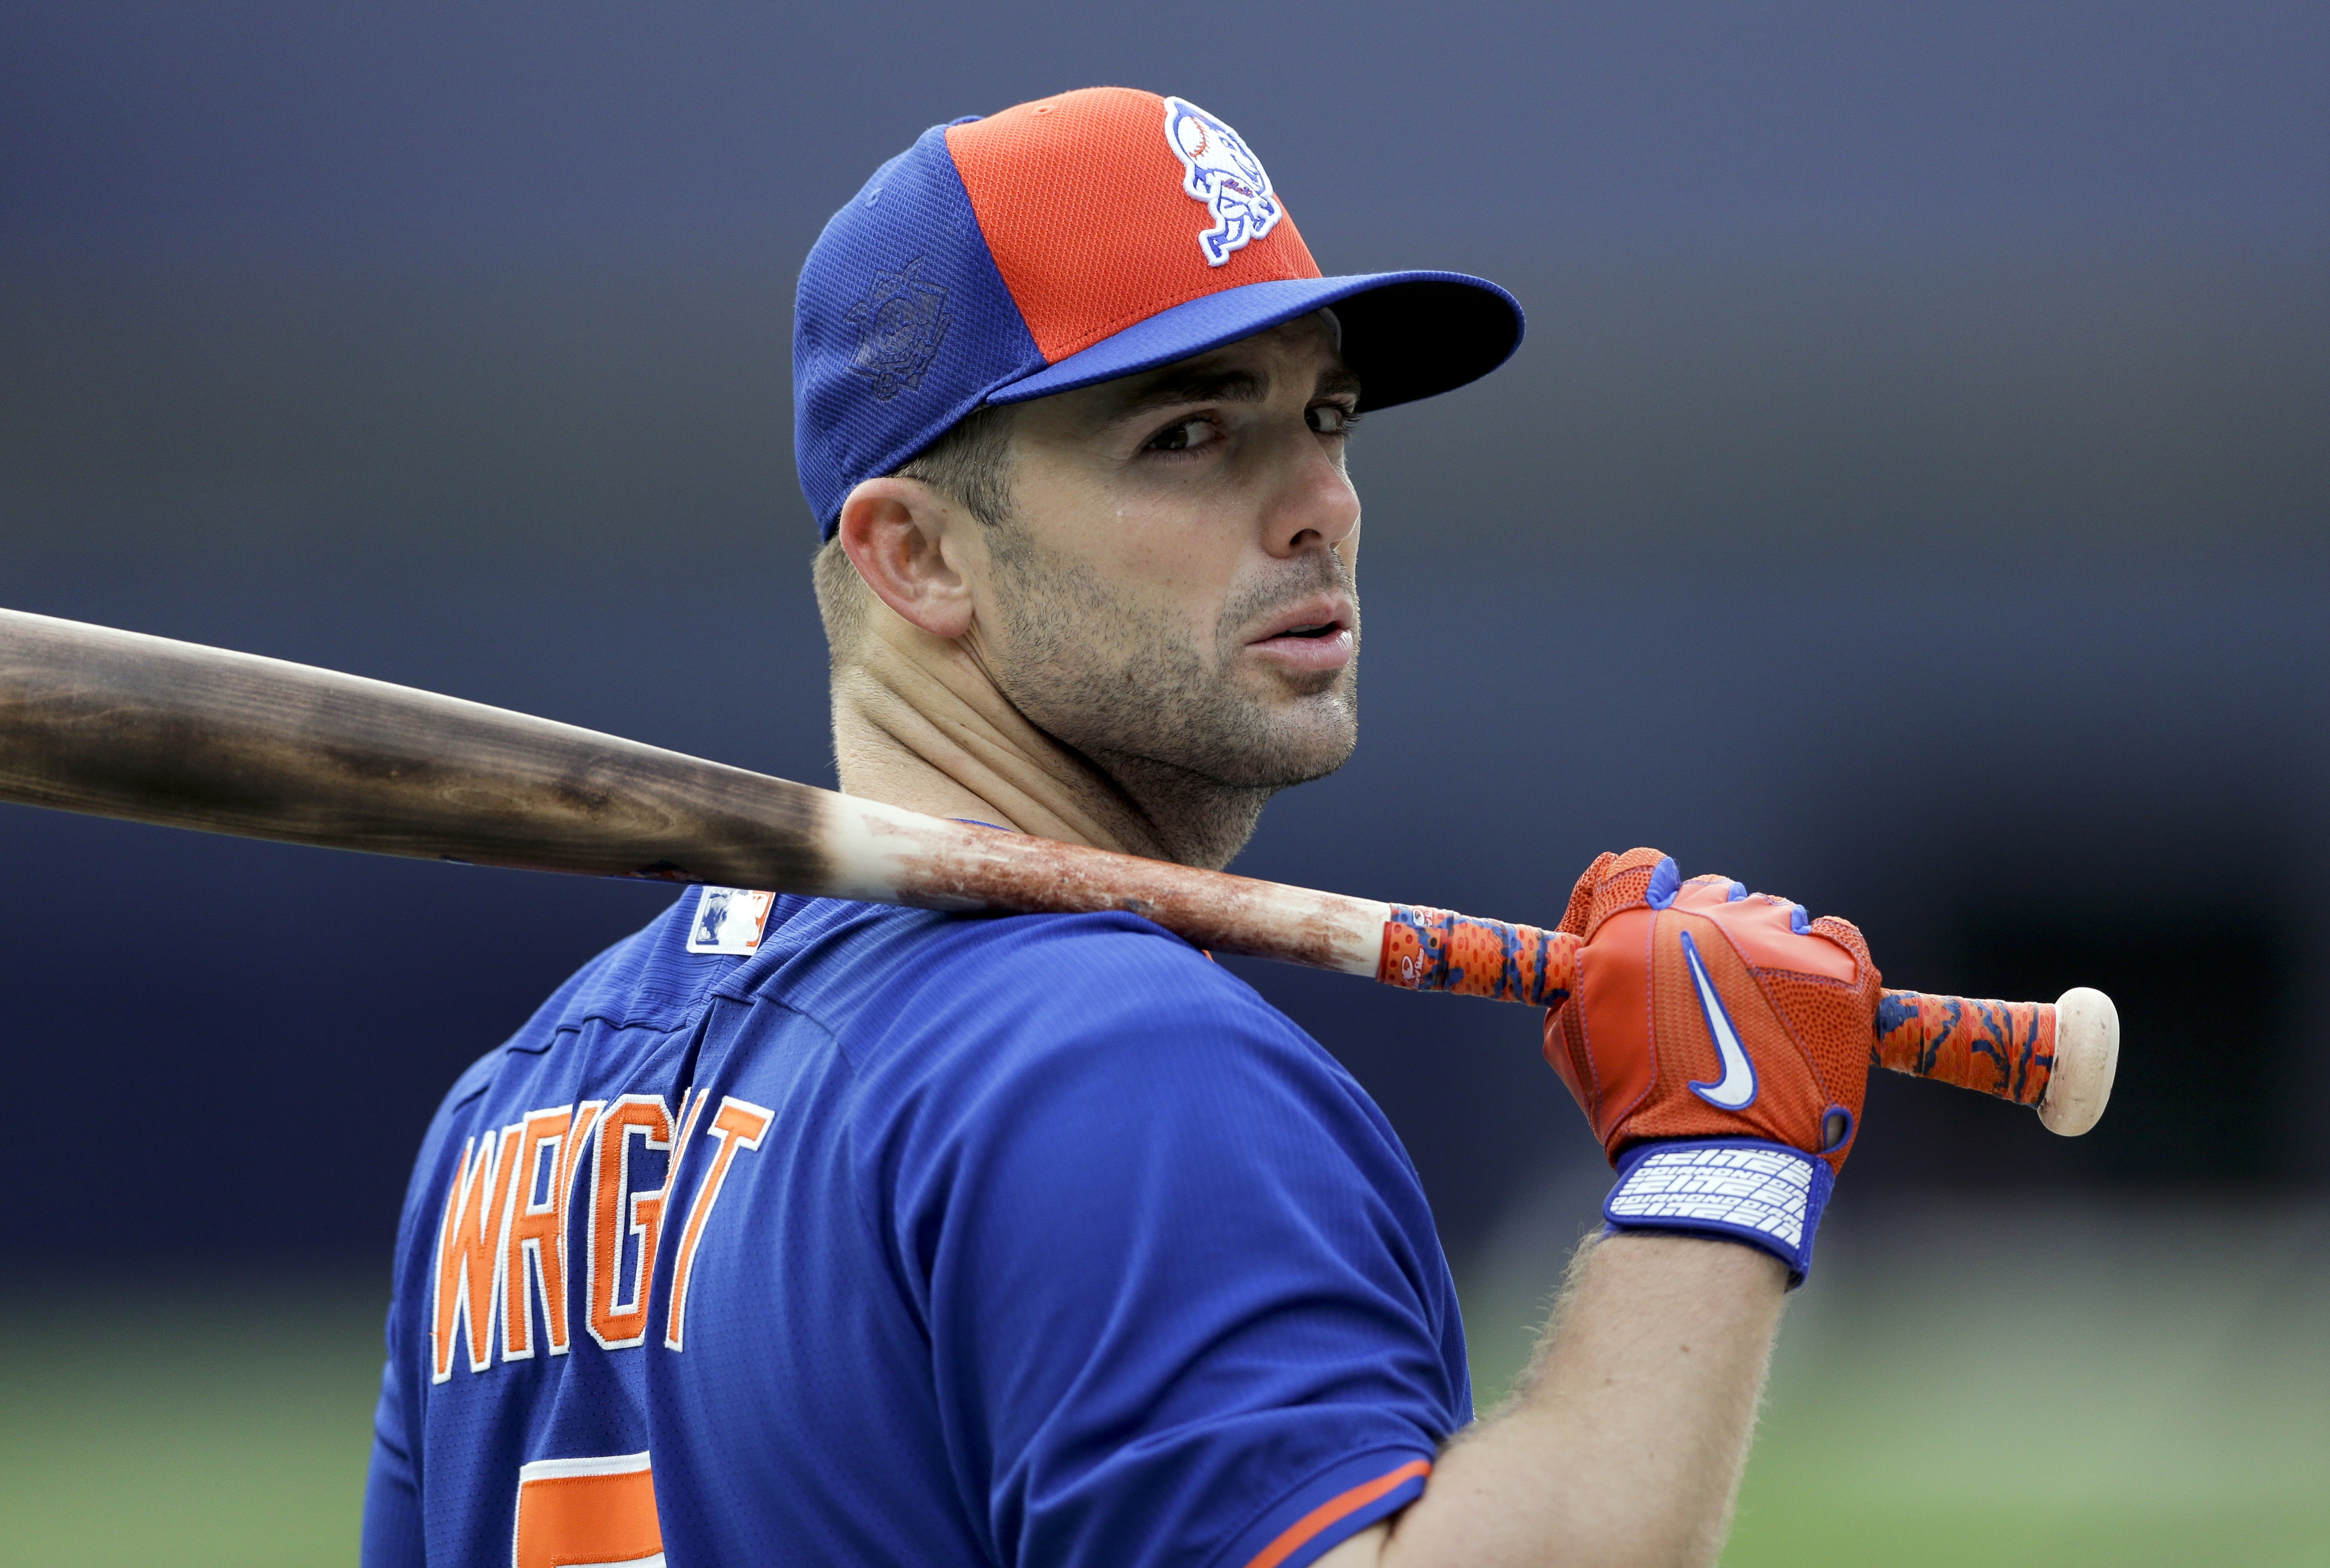 David Wright homers in 1st at-bat in return from spinal injury